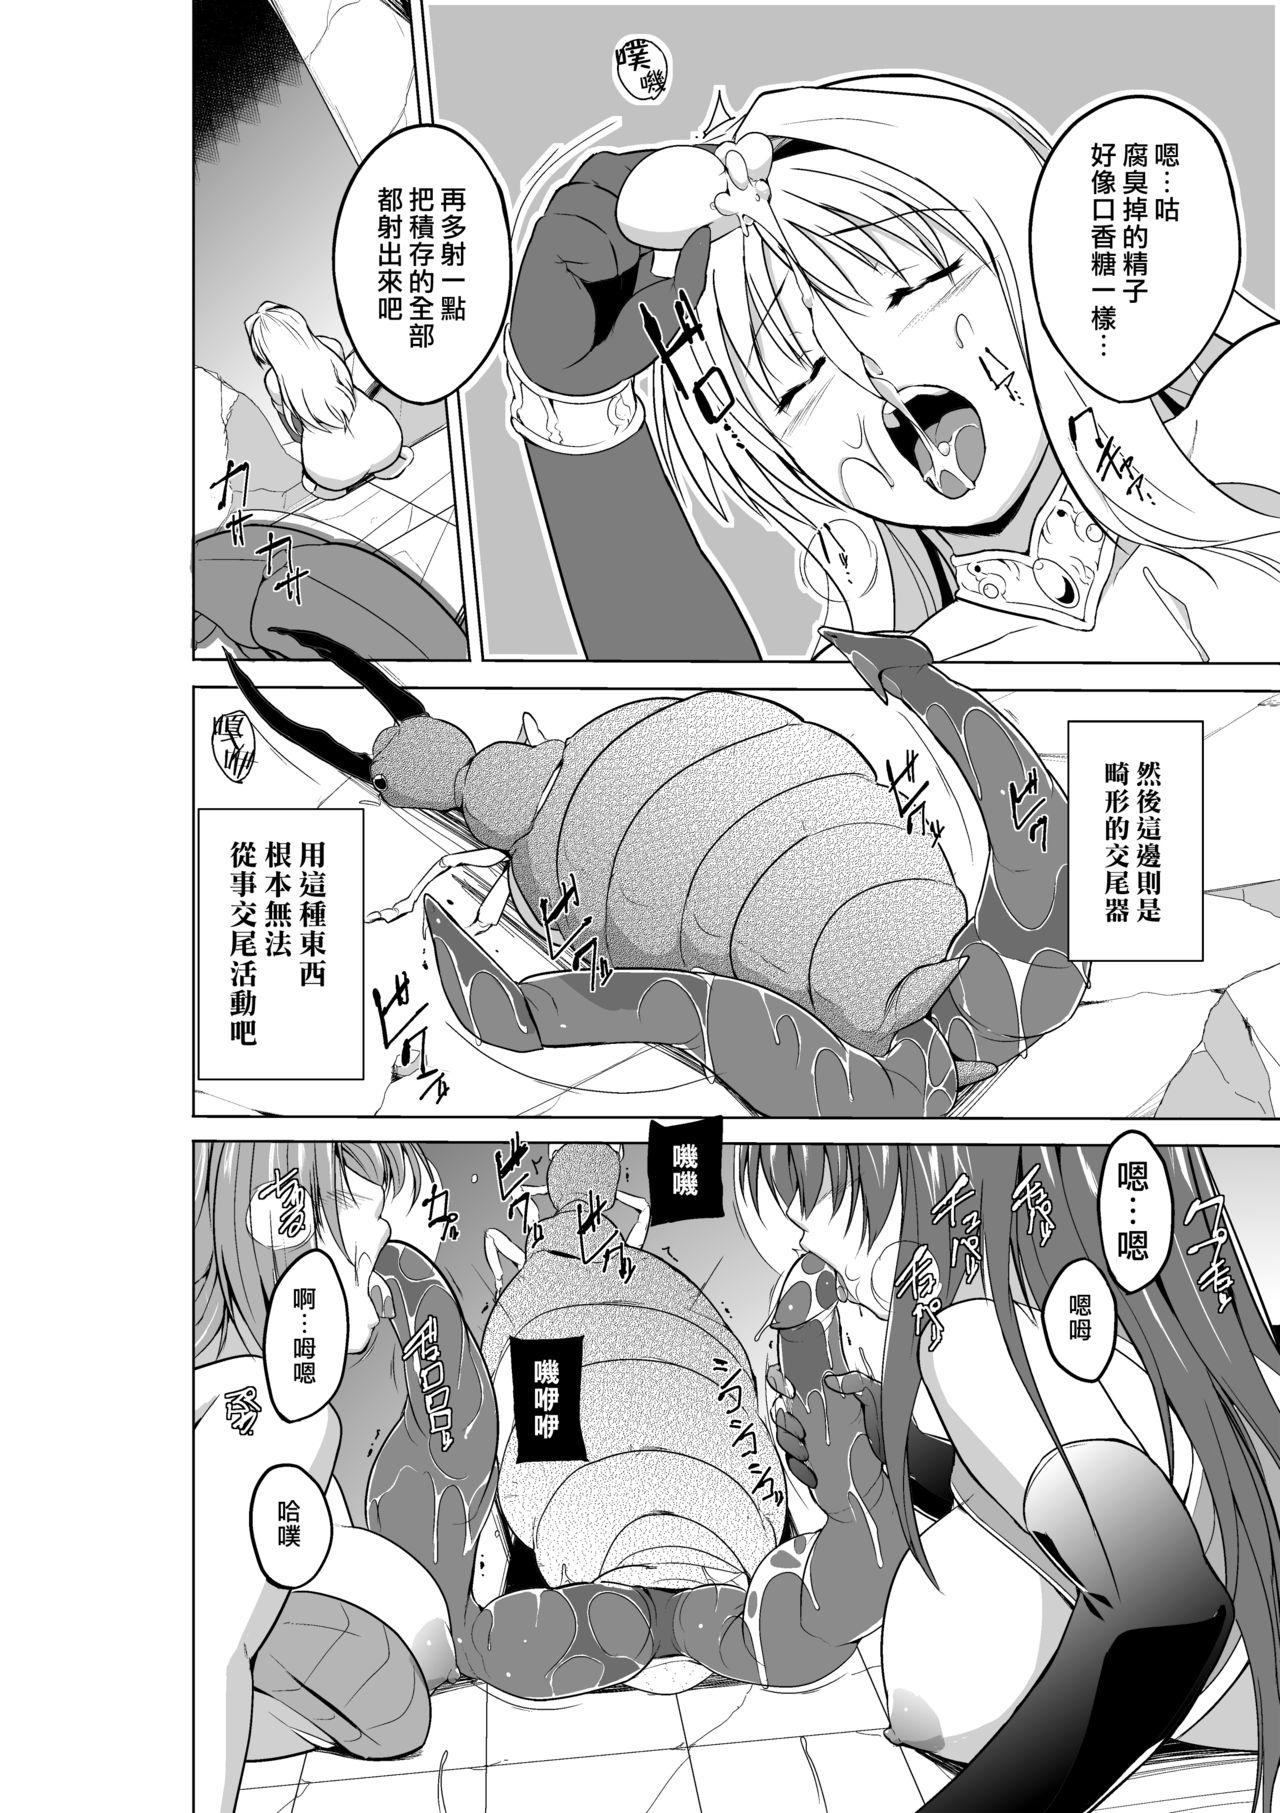 Best Blowjobs Ever Dungeon Travelers Minna no Oyuugi - Toheart2 Porra - Page 6